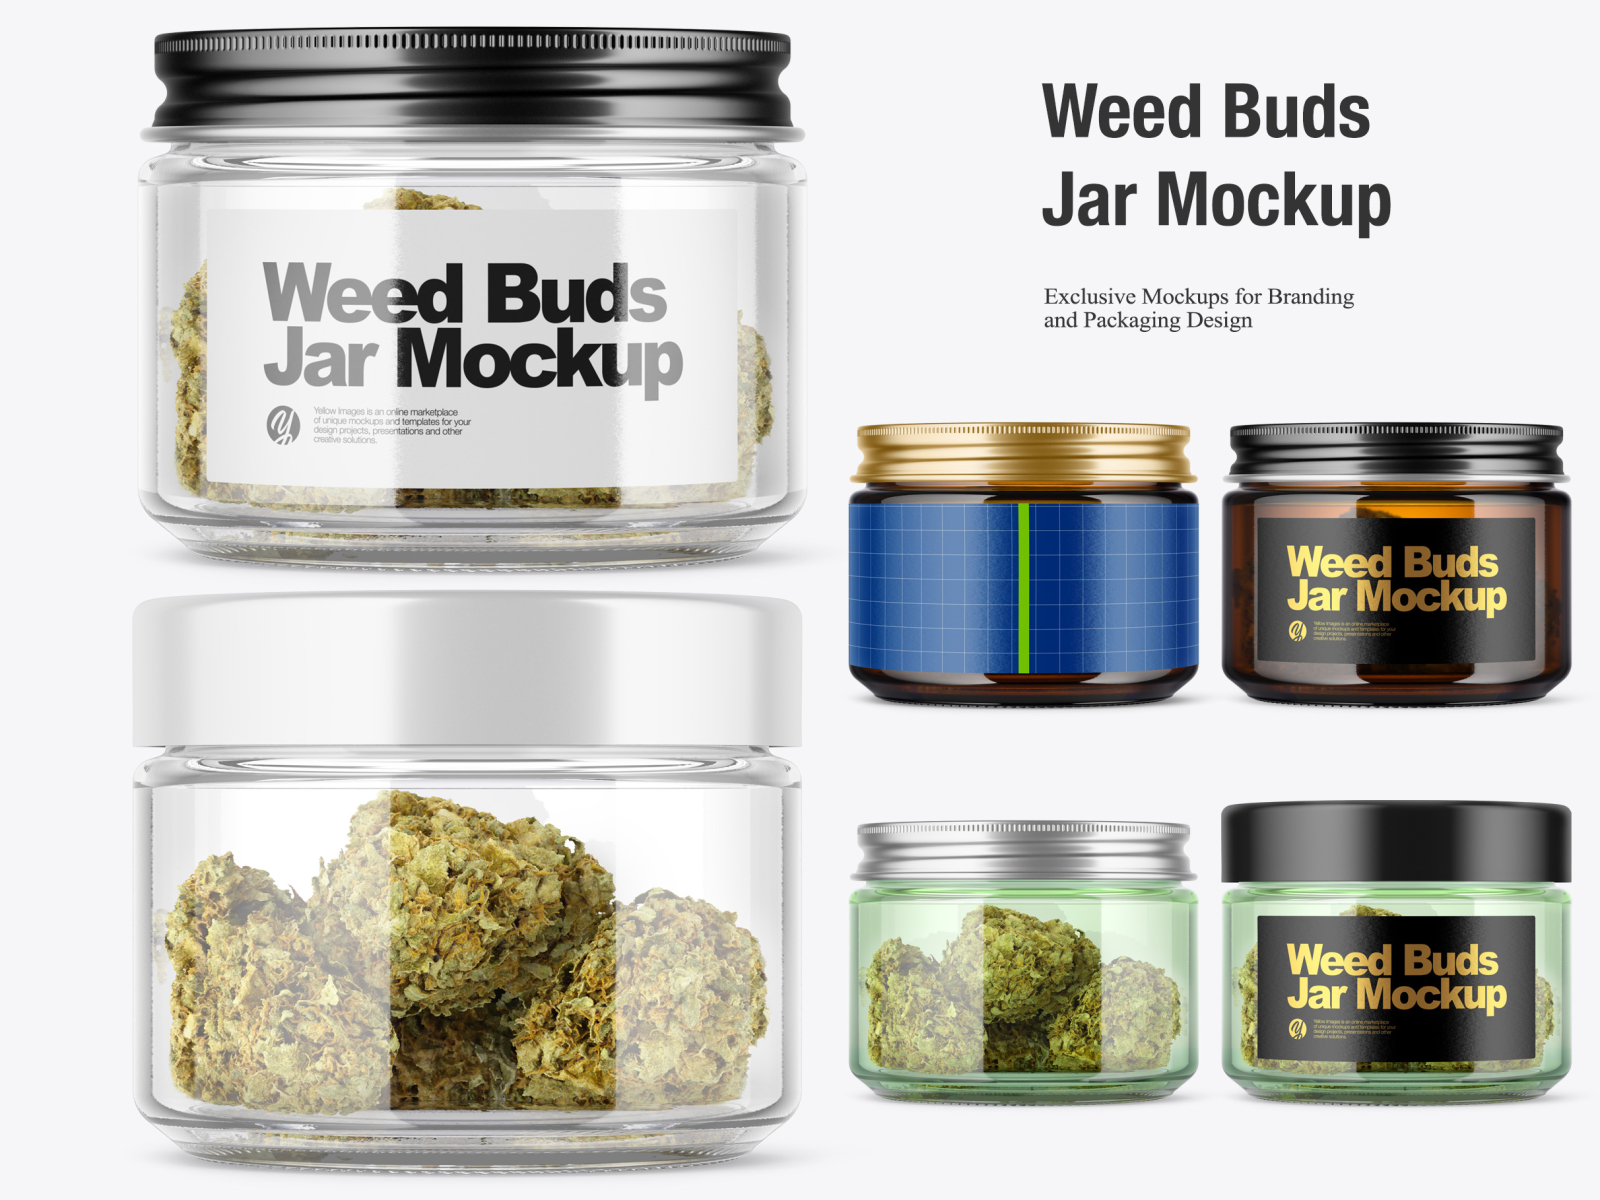 Weed Jar Mockup Best All Mockup Psd Create Your Diy Projects Using Your Cricut Explore Silhouette And More The Free Cut Files Include Psd Svg Dxf Eps And Png Files